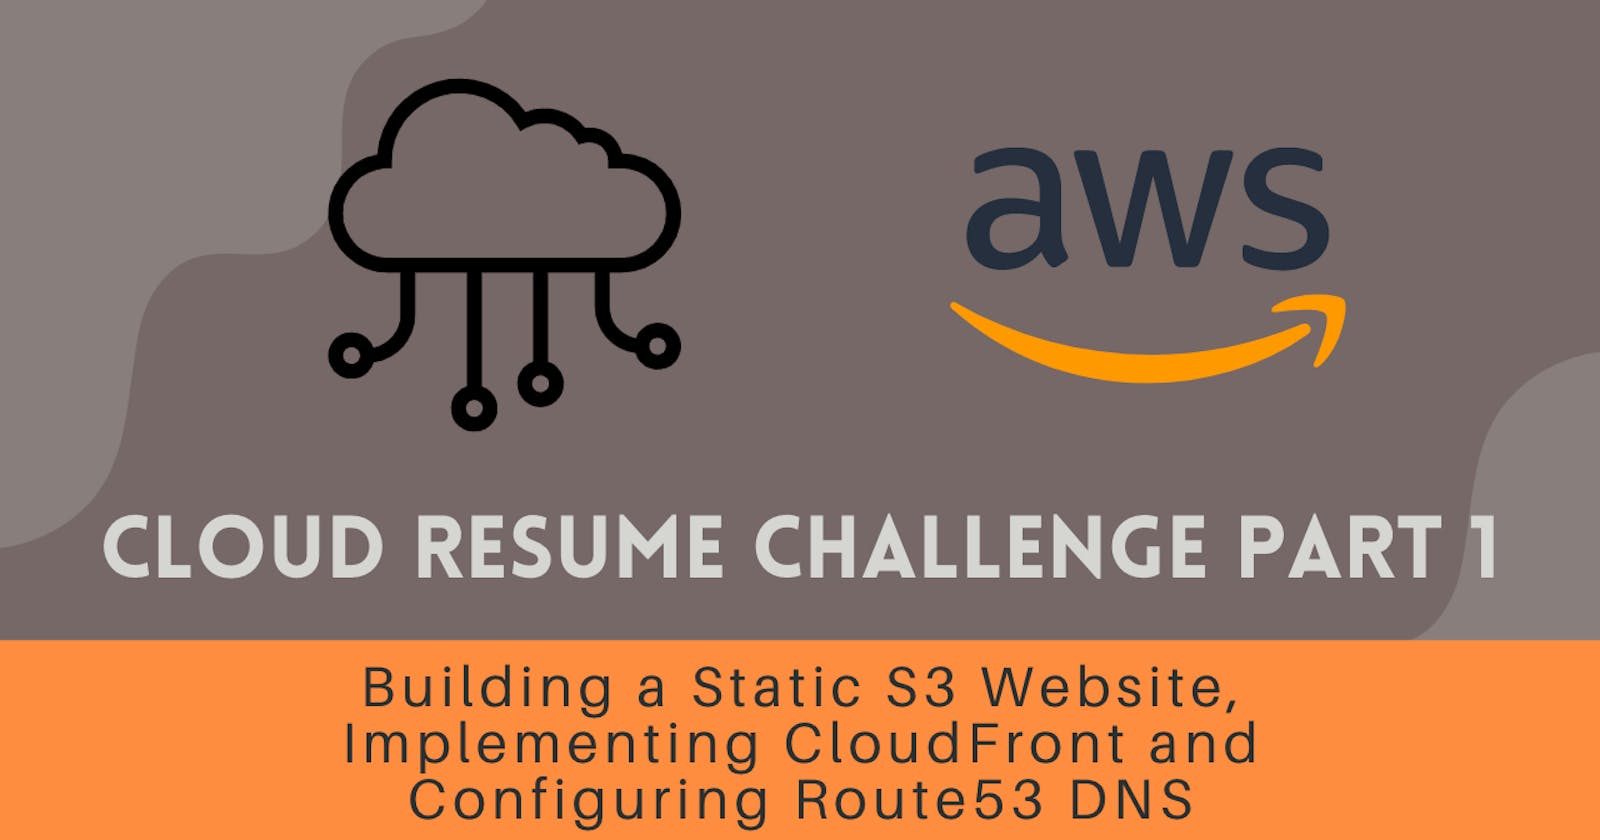 Cloud Resume Challenge Part 1 - Building a Static S3 Website, Implementing CloudFront and Configuring Route53 DNS